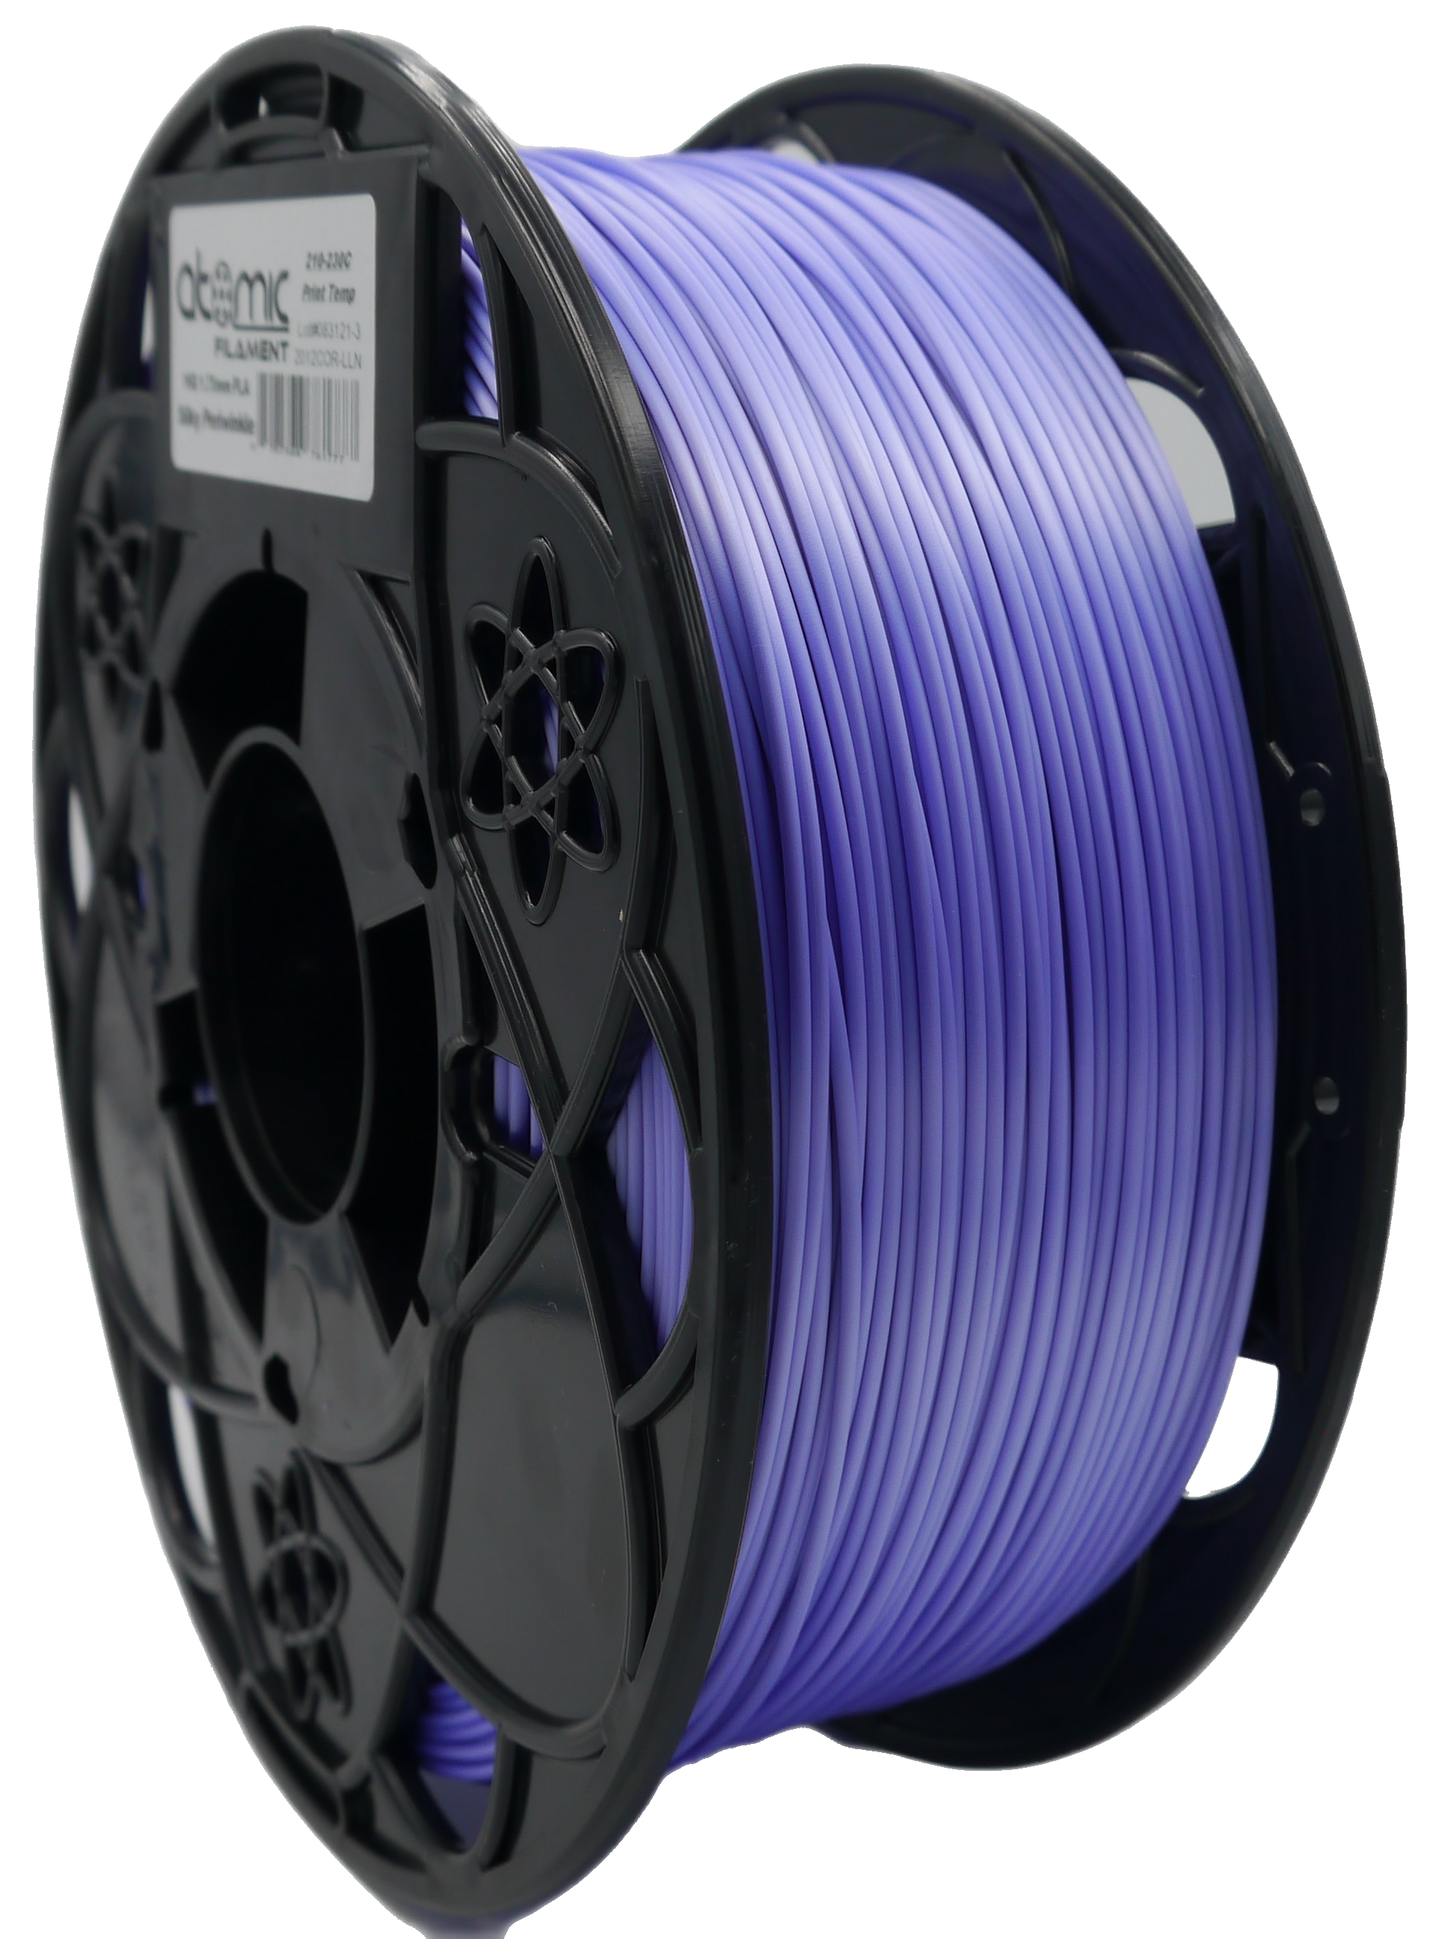 Silky Periwinkle PLA Filament